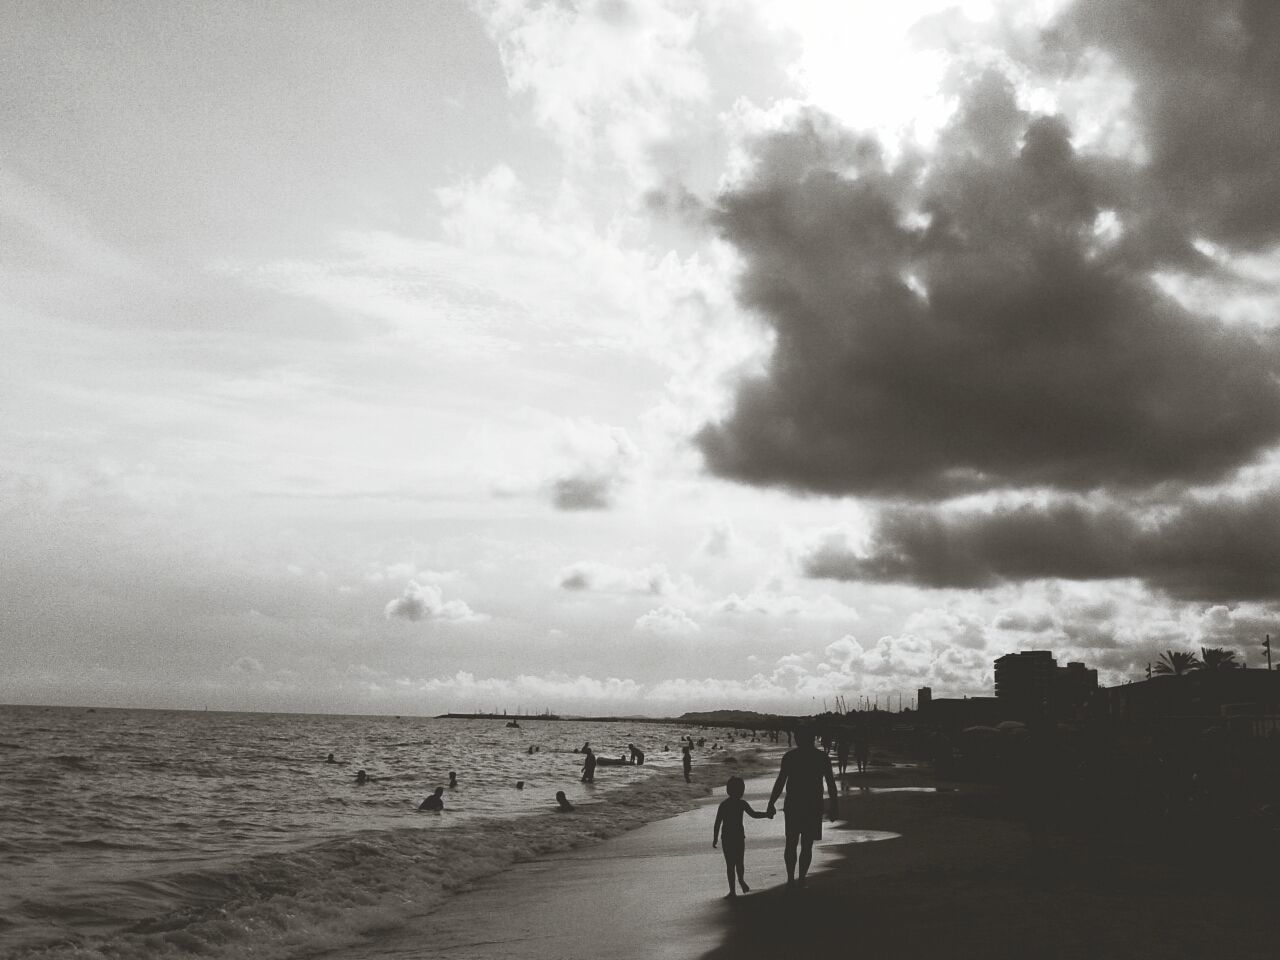 Silhouette people at beach against cloudy sky